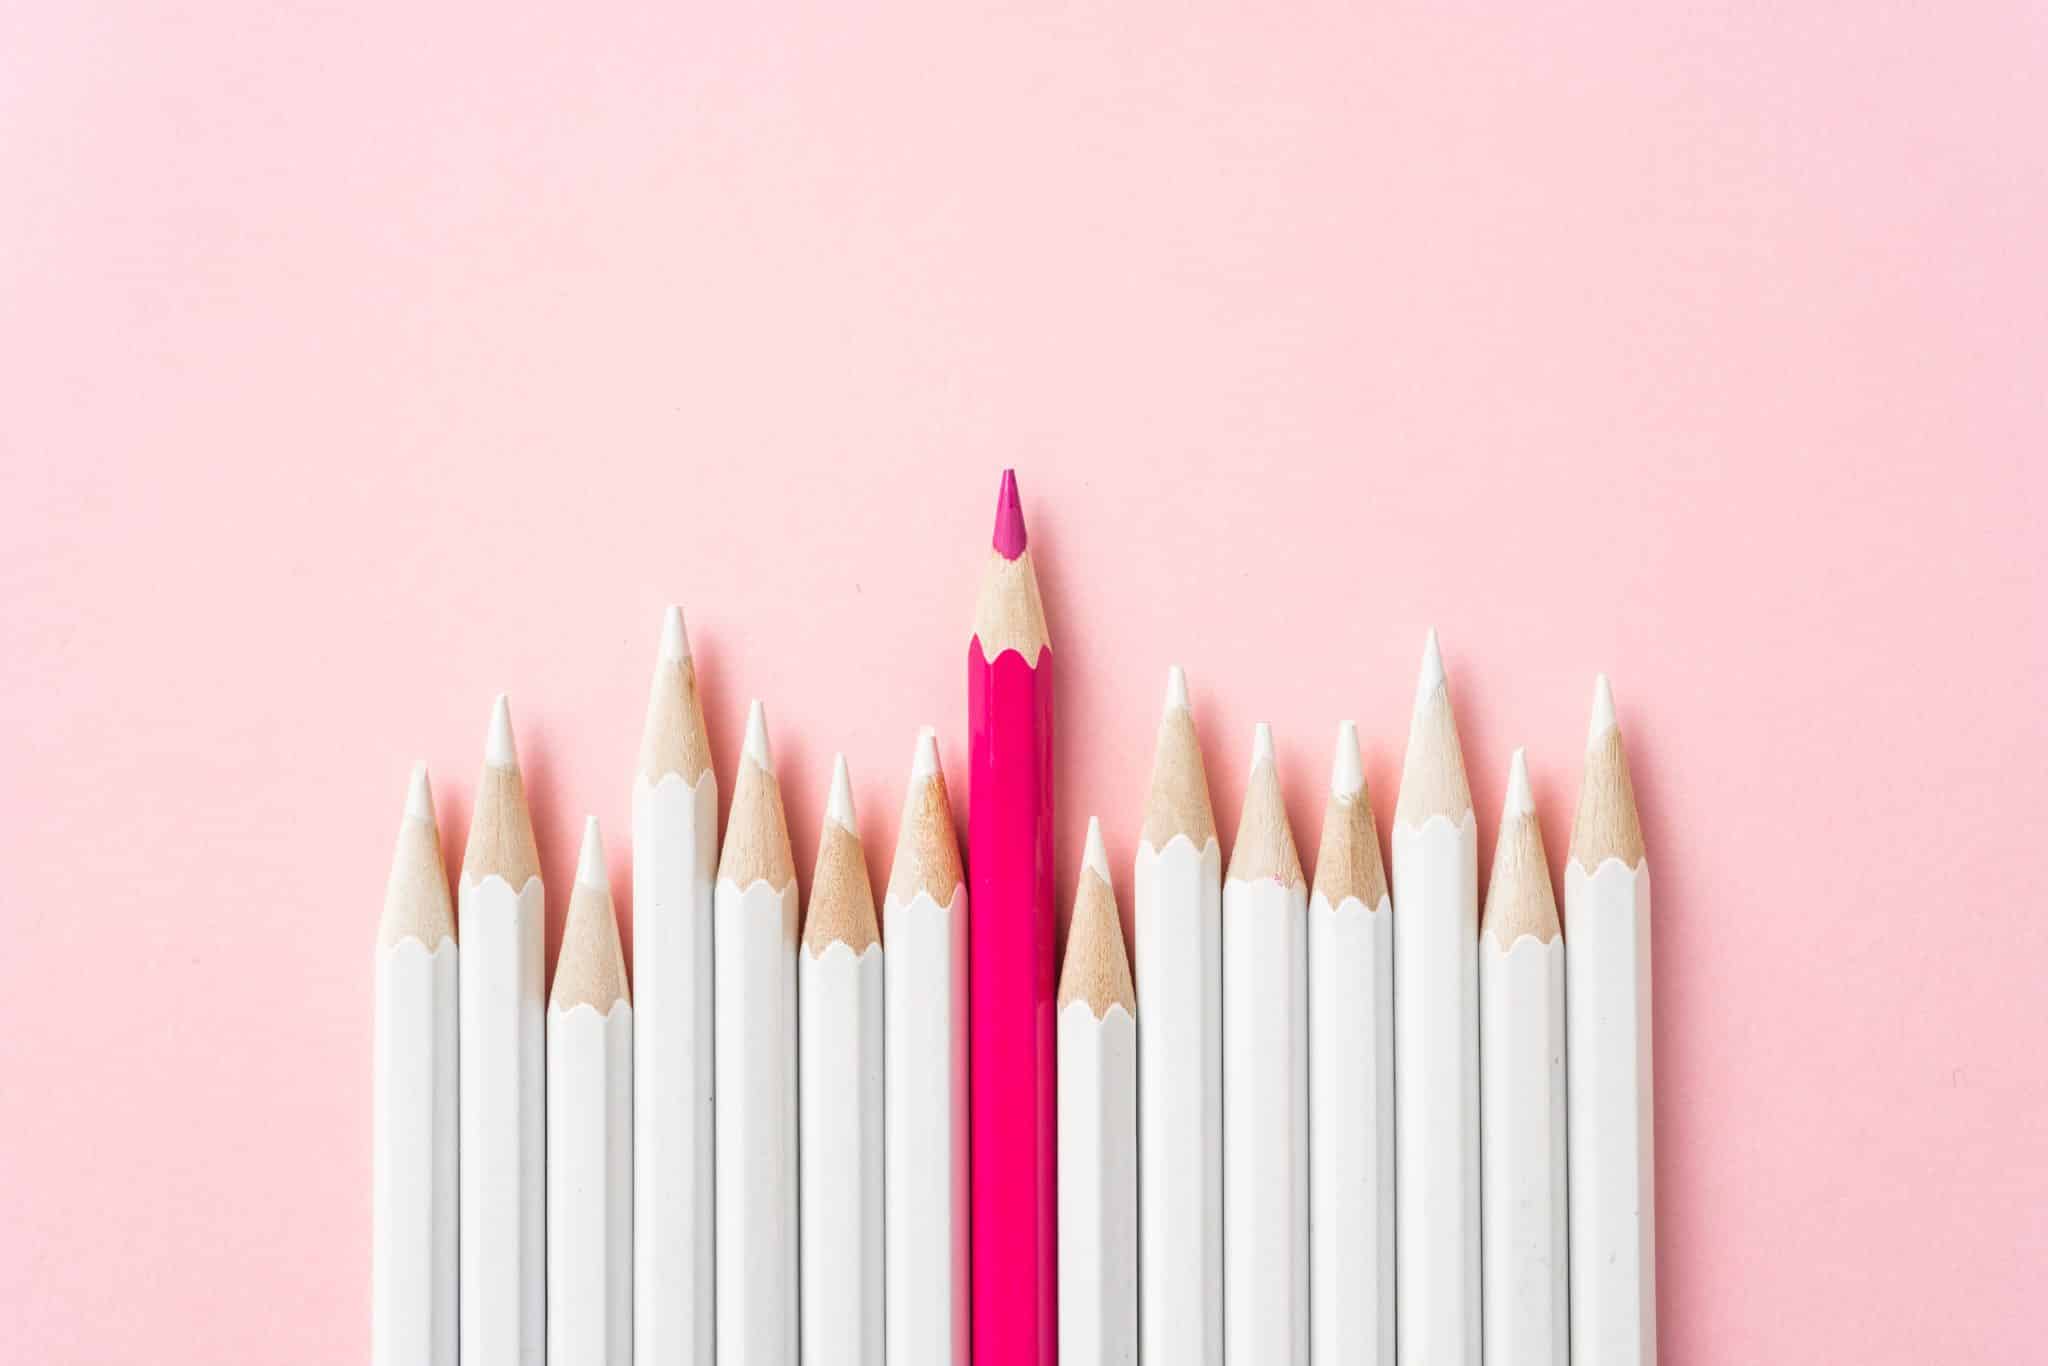 One pink pencil amongst many white pencils